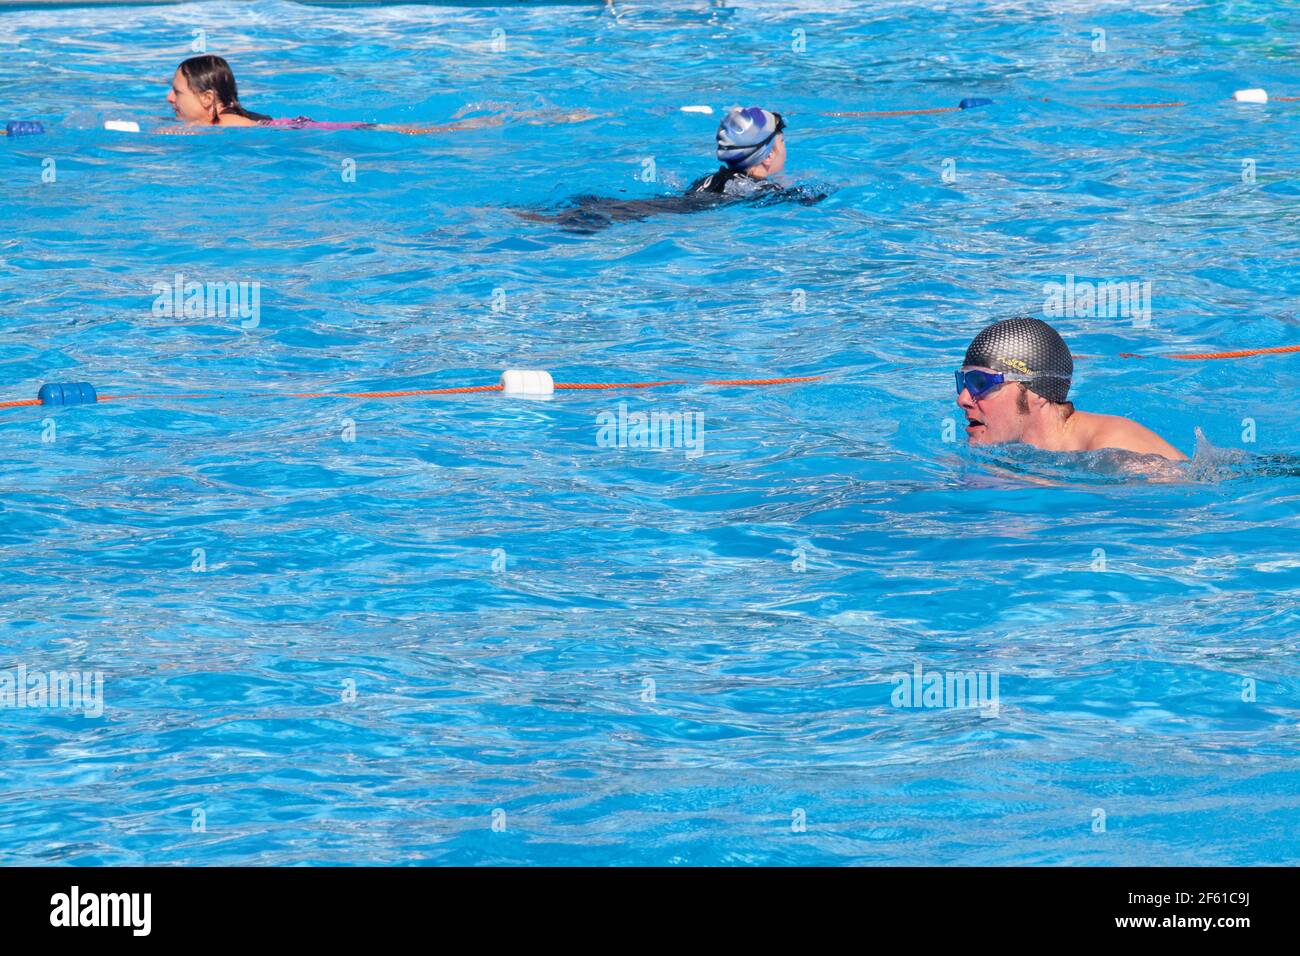 London, UK, 29 March 2021: Brockwell Lido reopened today as lockdown eases  in England. Swimmers of all ages took advantage of the sunshine to brave  water at a chilly 9.8 centigrade. The